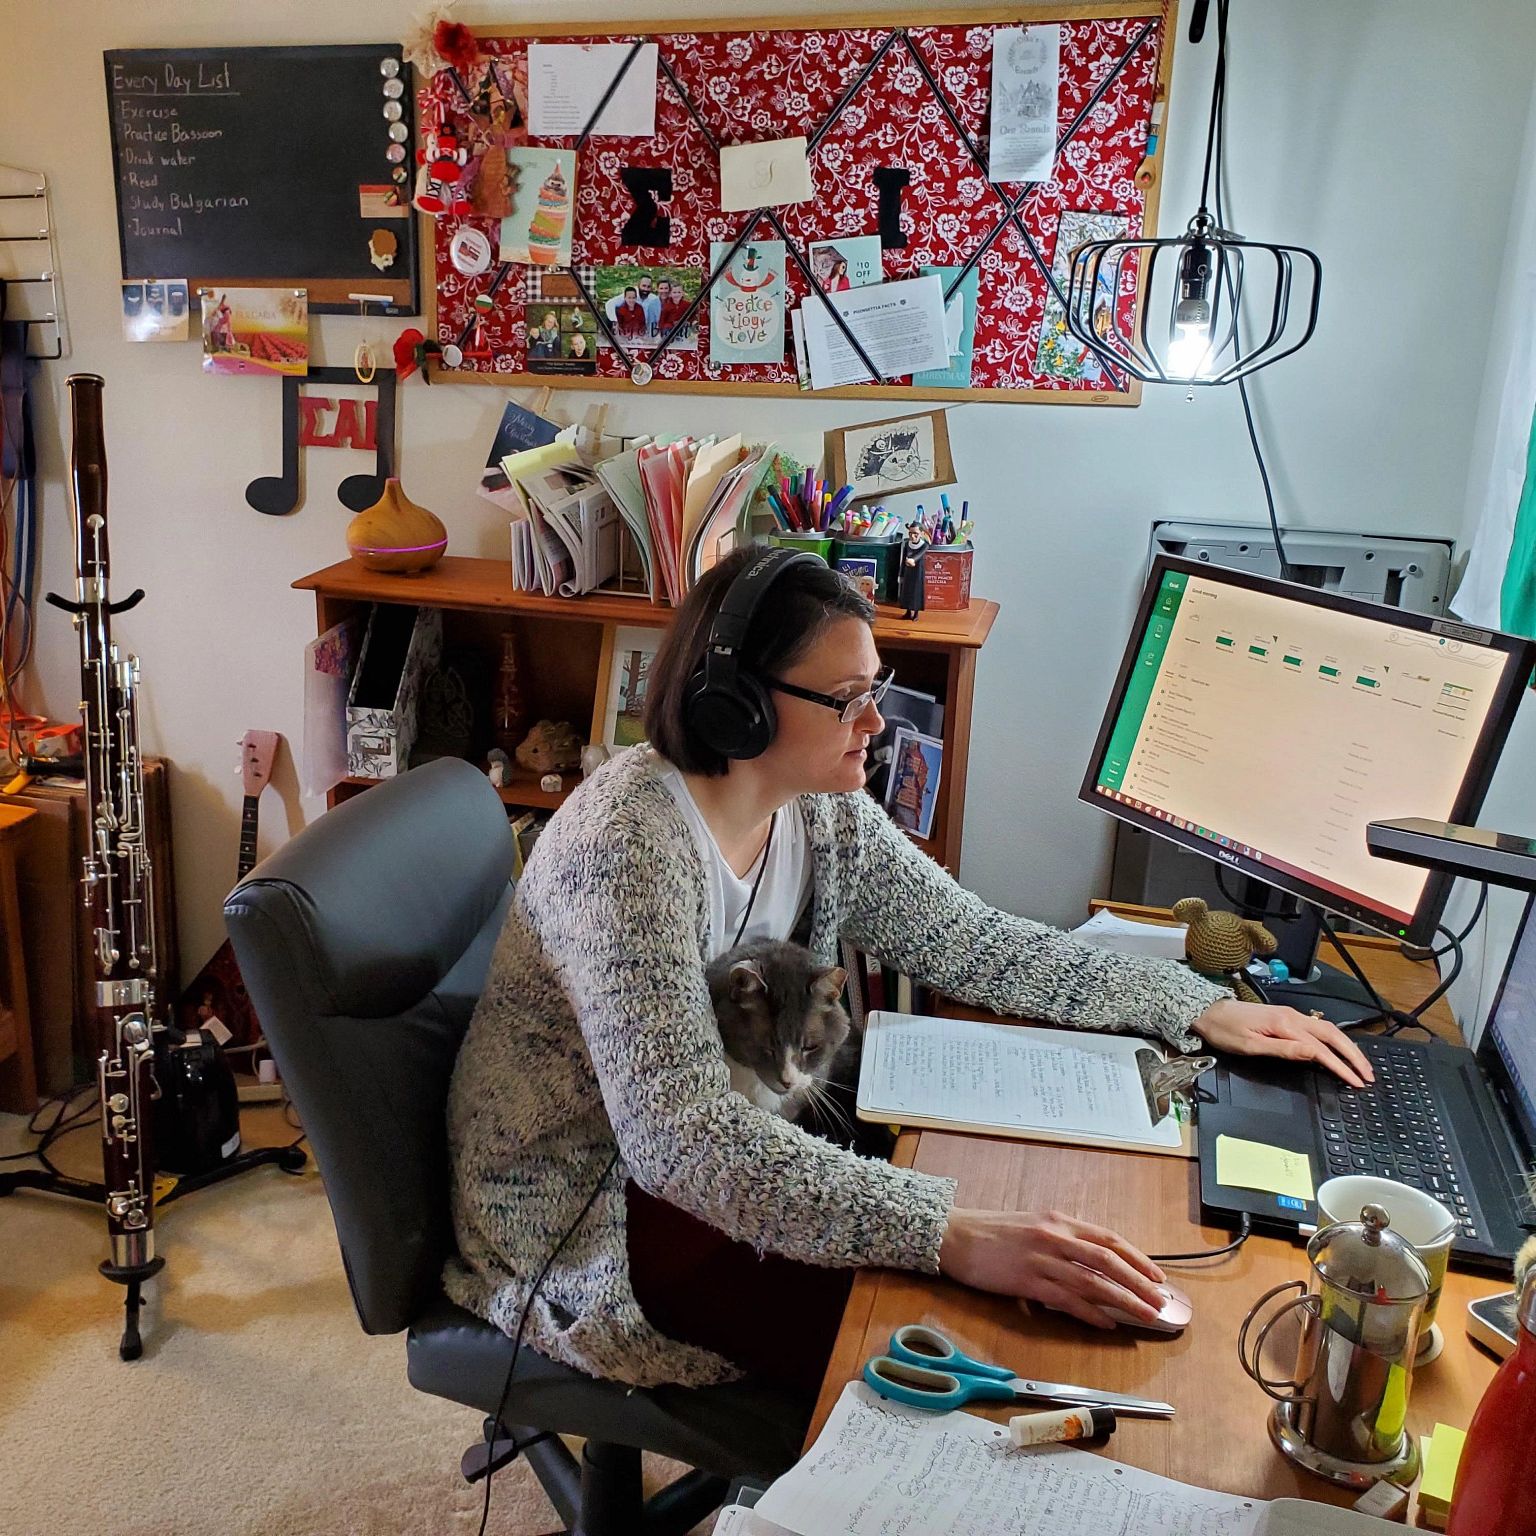 A woman works at her home computer with a cat sitting on her lap.